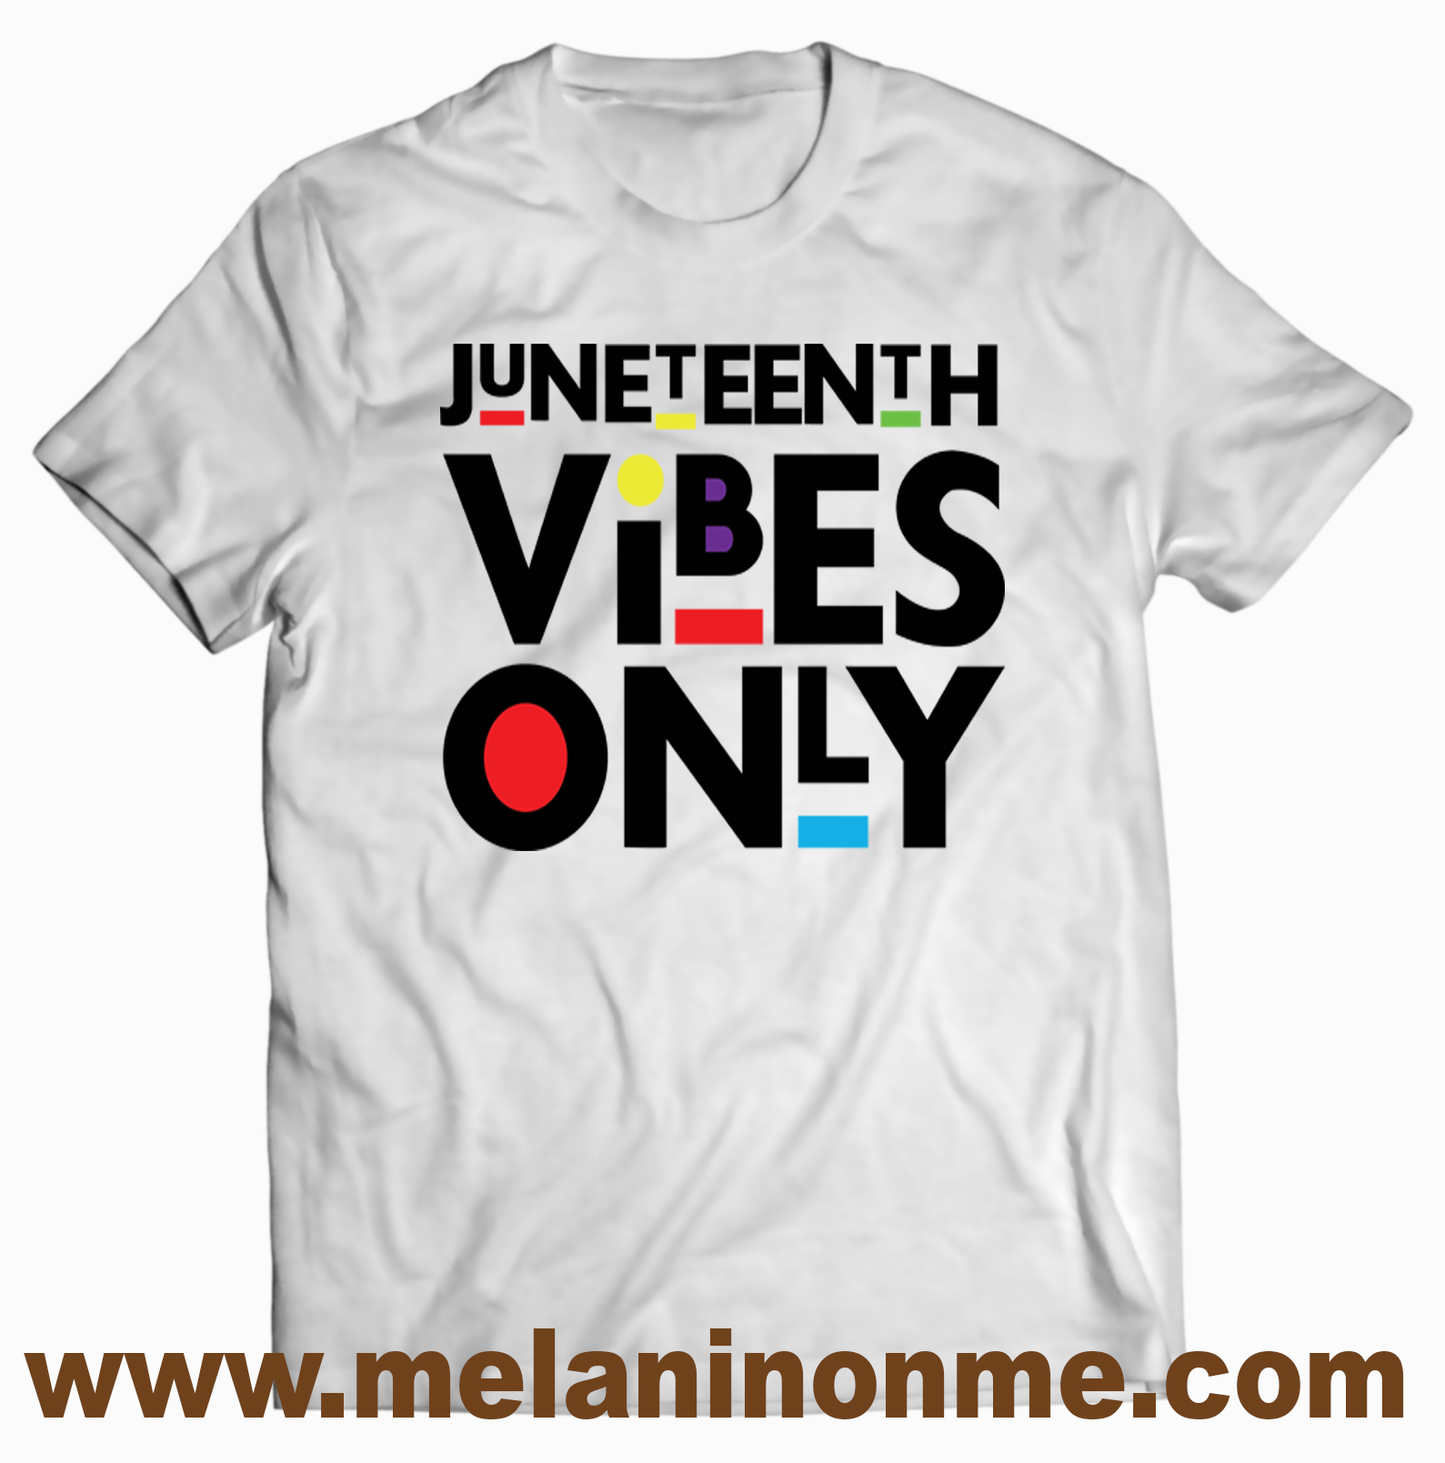 Juneteenth Vibes Only Tshirt - Unisex